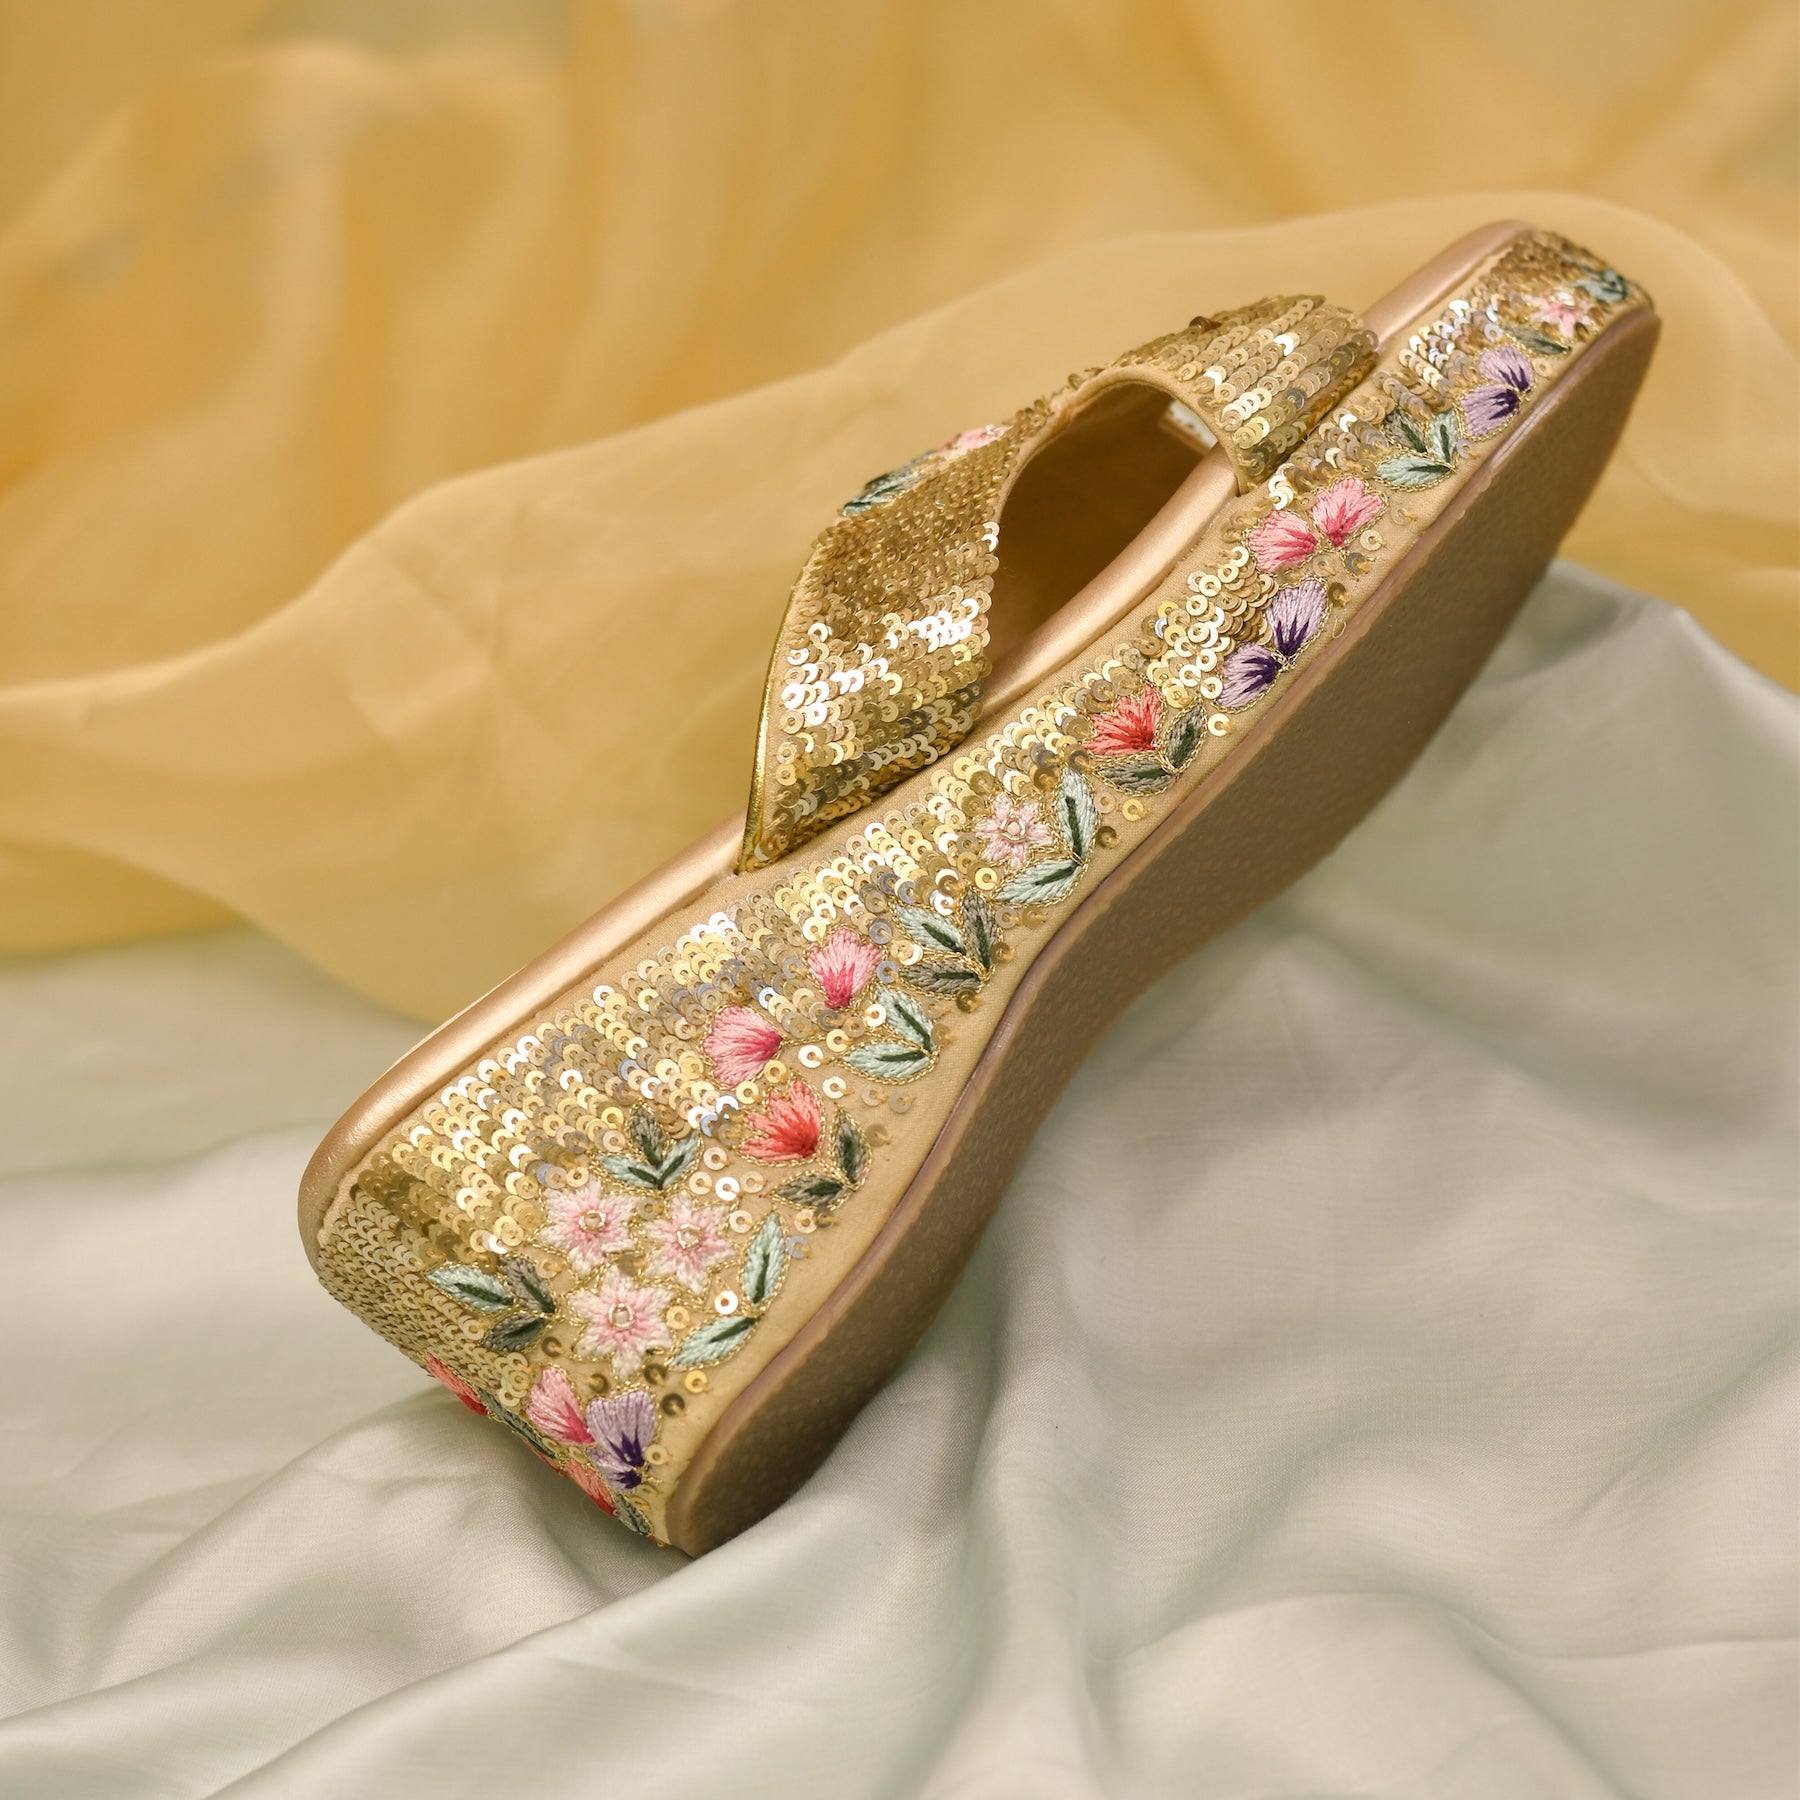 Shimmery Indian footwear for occasions and functions